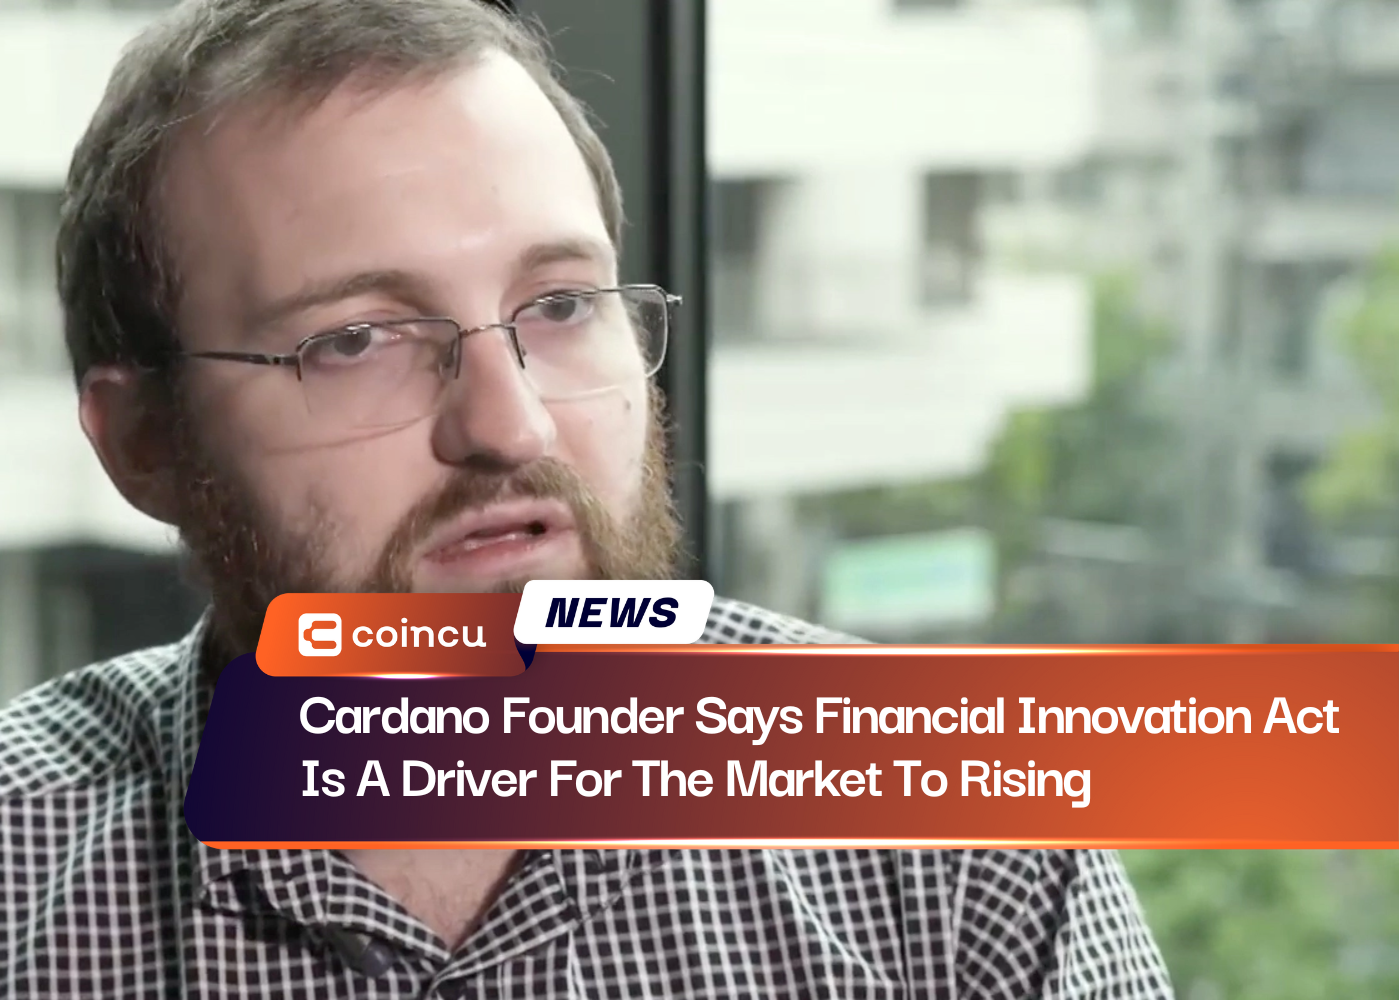 Cardano Founder Says Financial Innovation Act Is A Driver For The Market To Rising